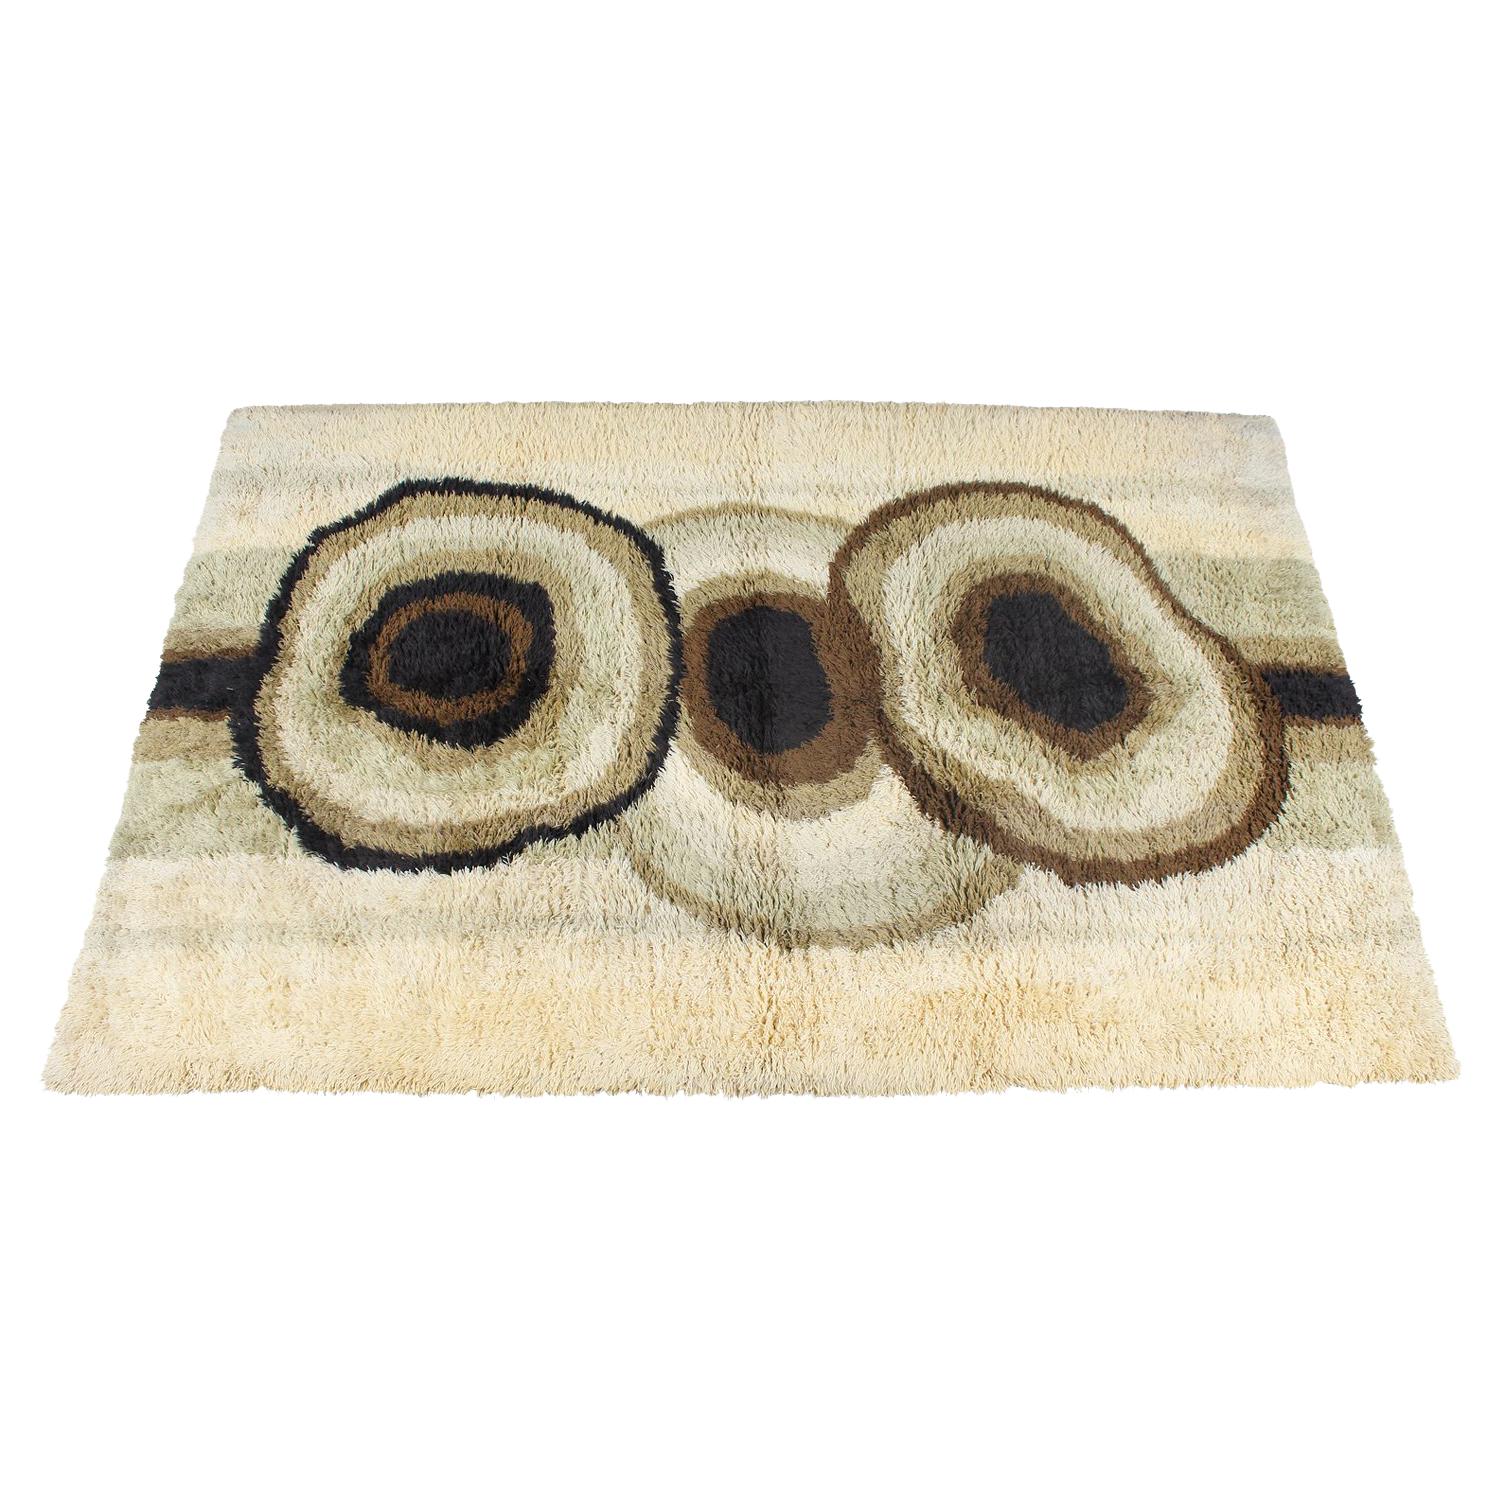 Large Danish Modern Hand-Knotted Wool Rug by Rya